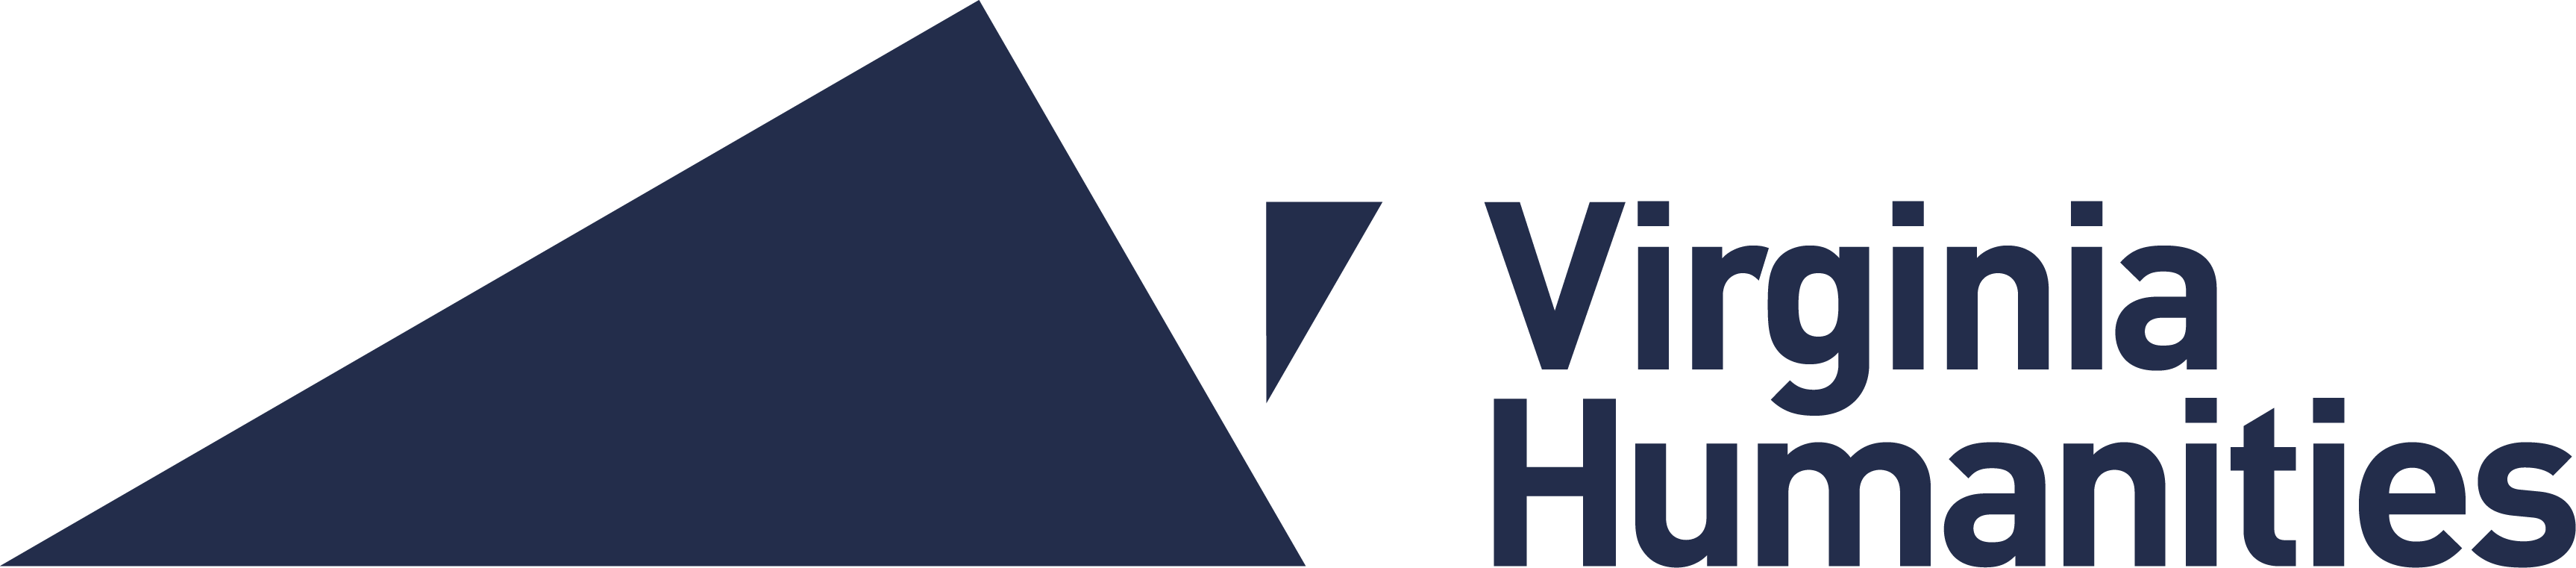 Virginia Foundation for the Humanities logo